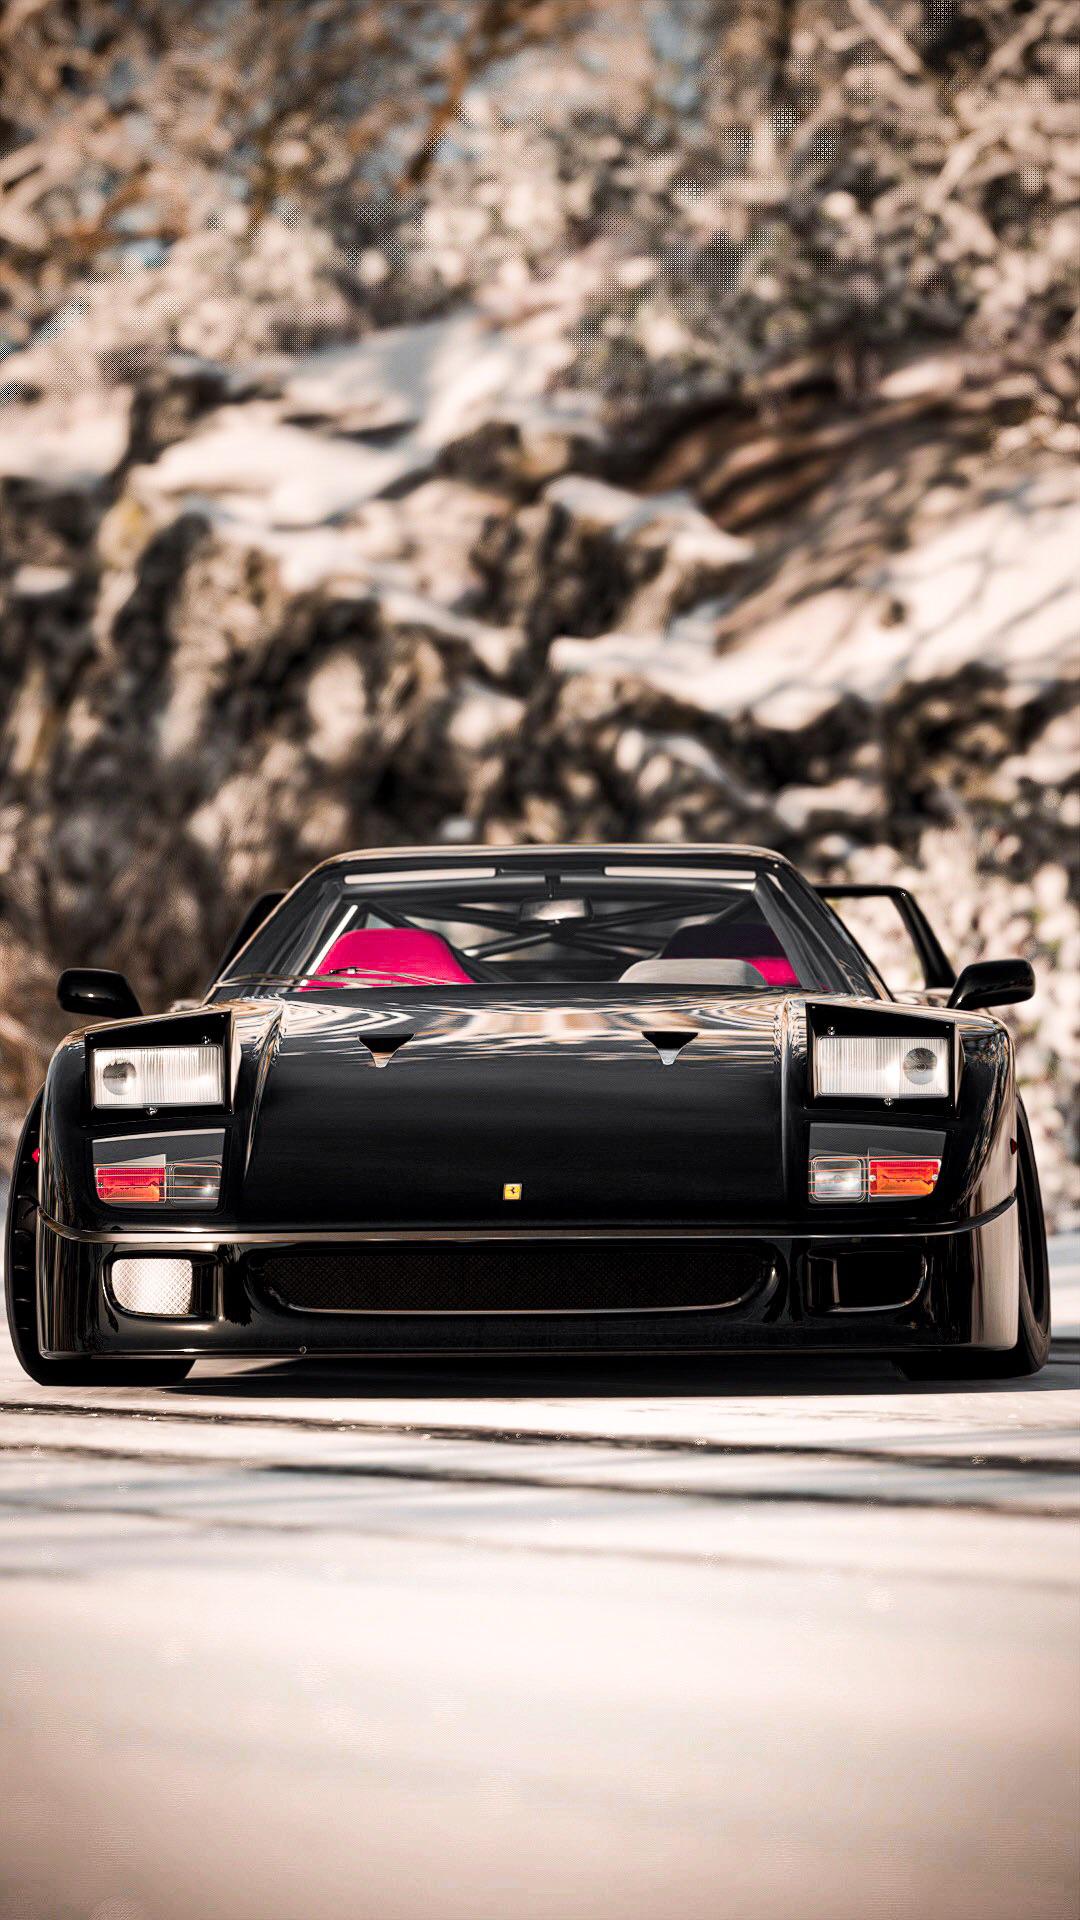 Download These Ferrari iPhone Wallpaper from Forza Now and Thank